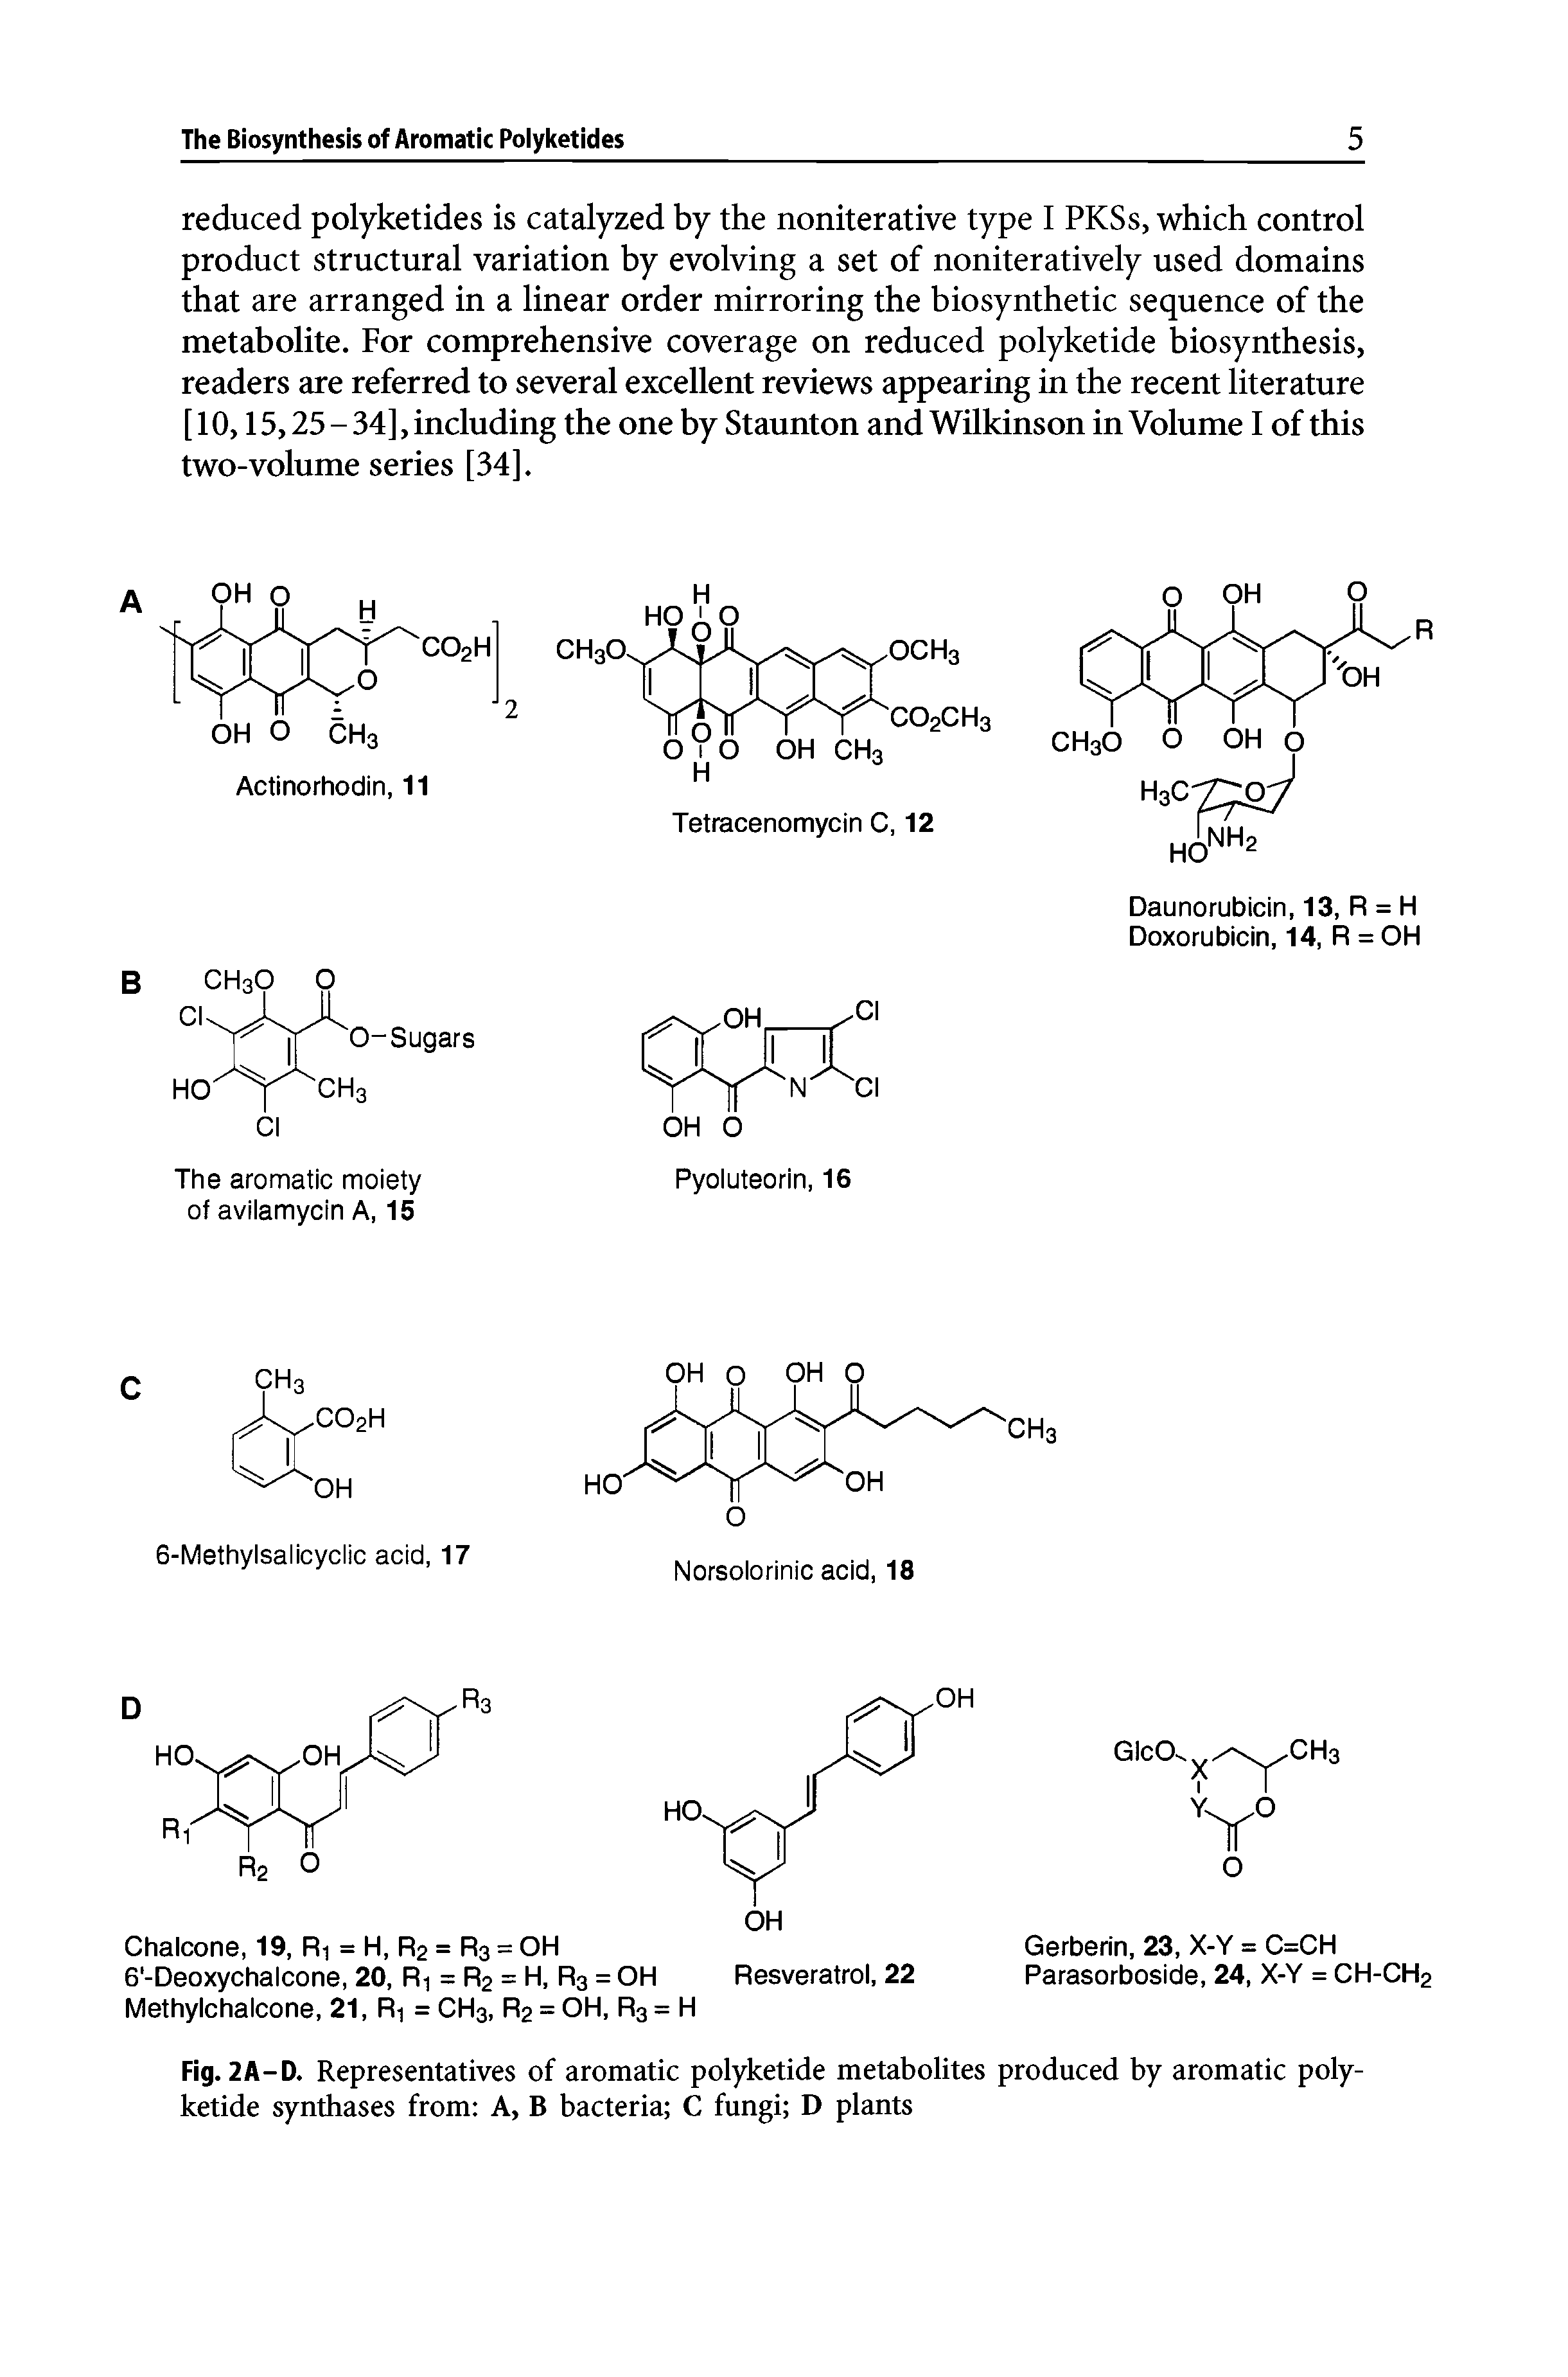 Fig. 2A-D. Representatives of aromatic polyketide metabolites produced by aromatic polyketide synthases from A, B bacteria C fungi D plants...